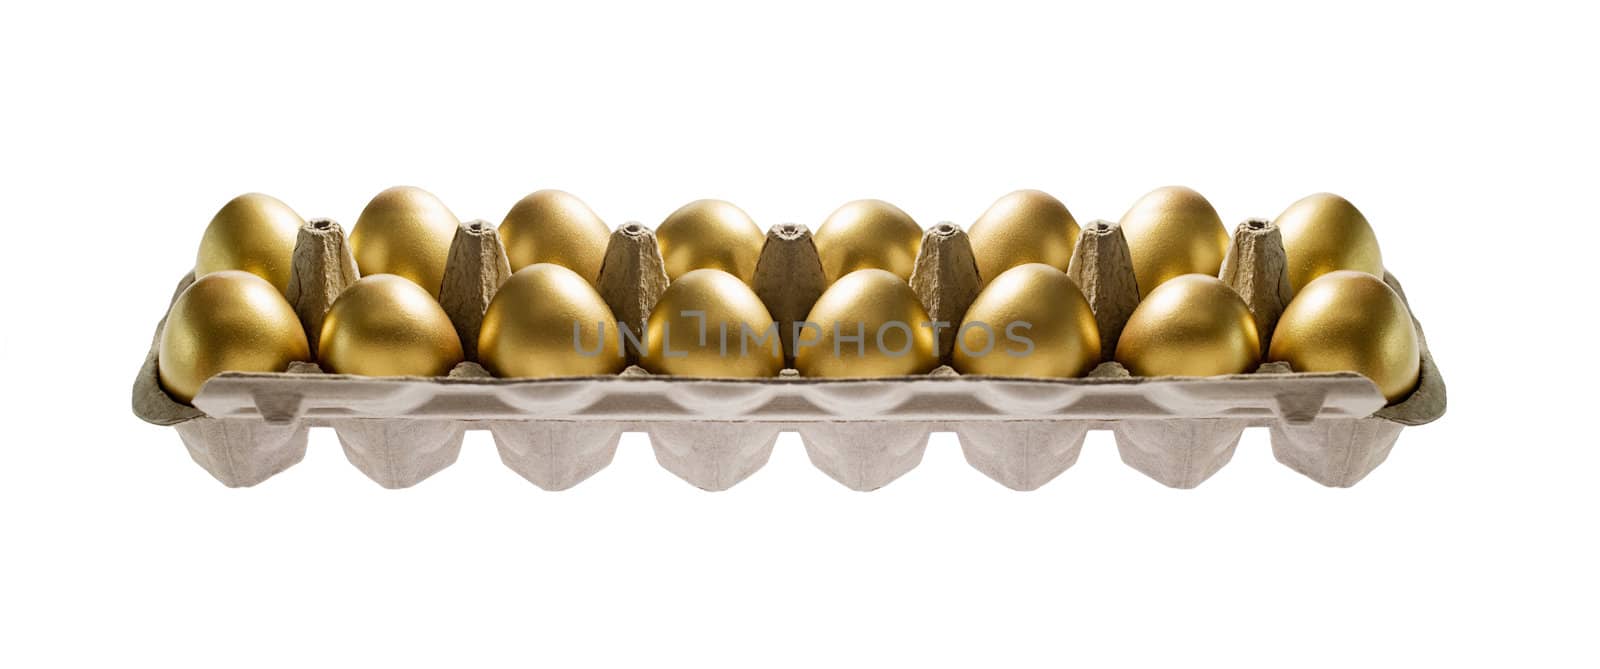 Golden Eggs in package isolated on white